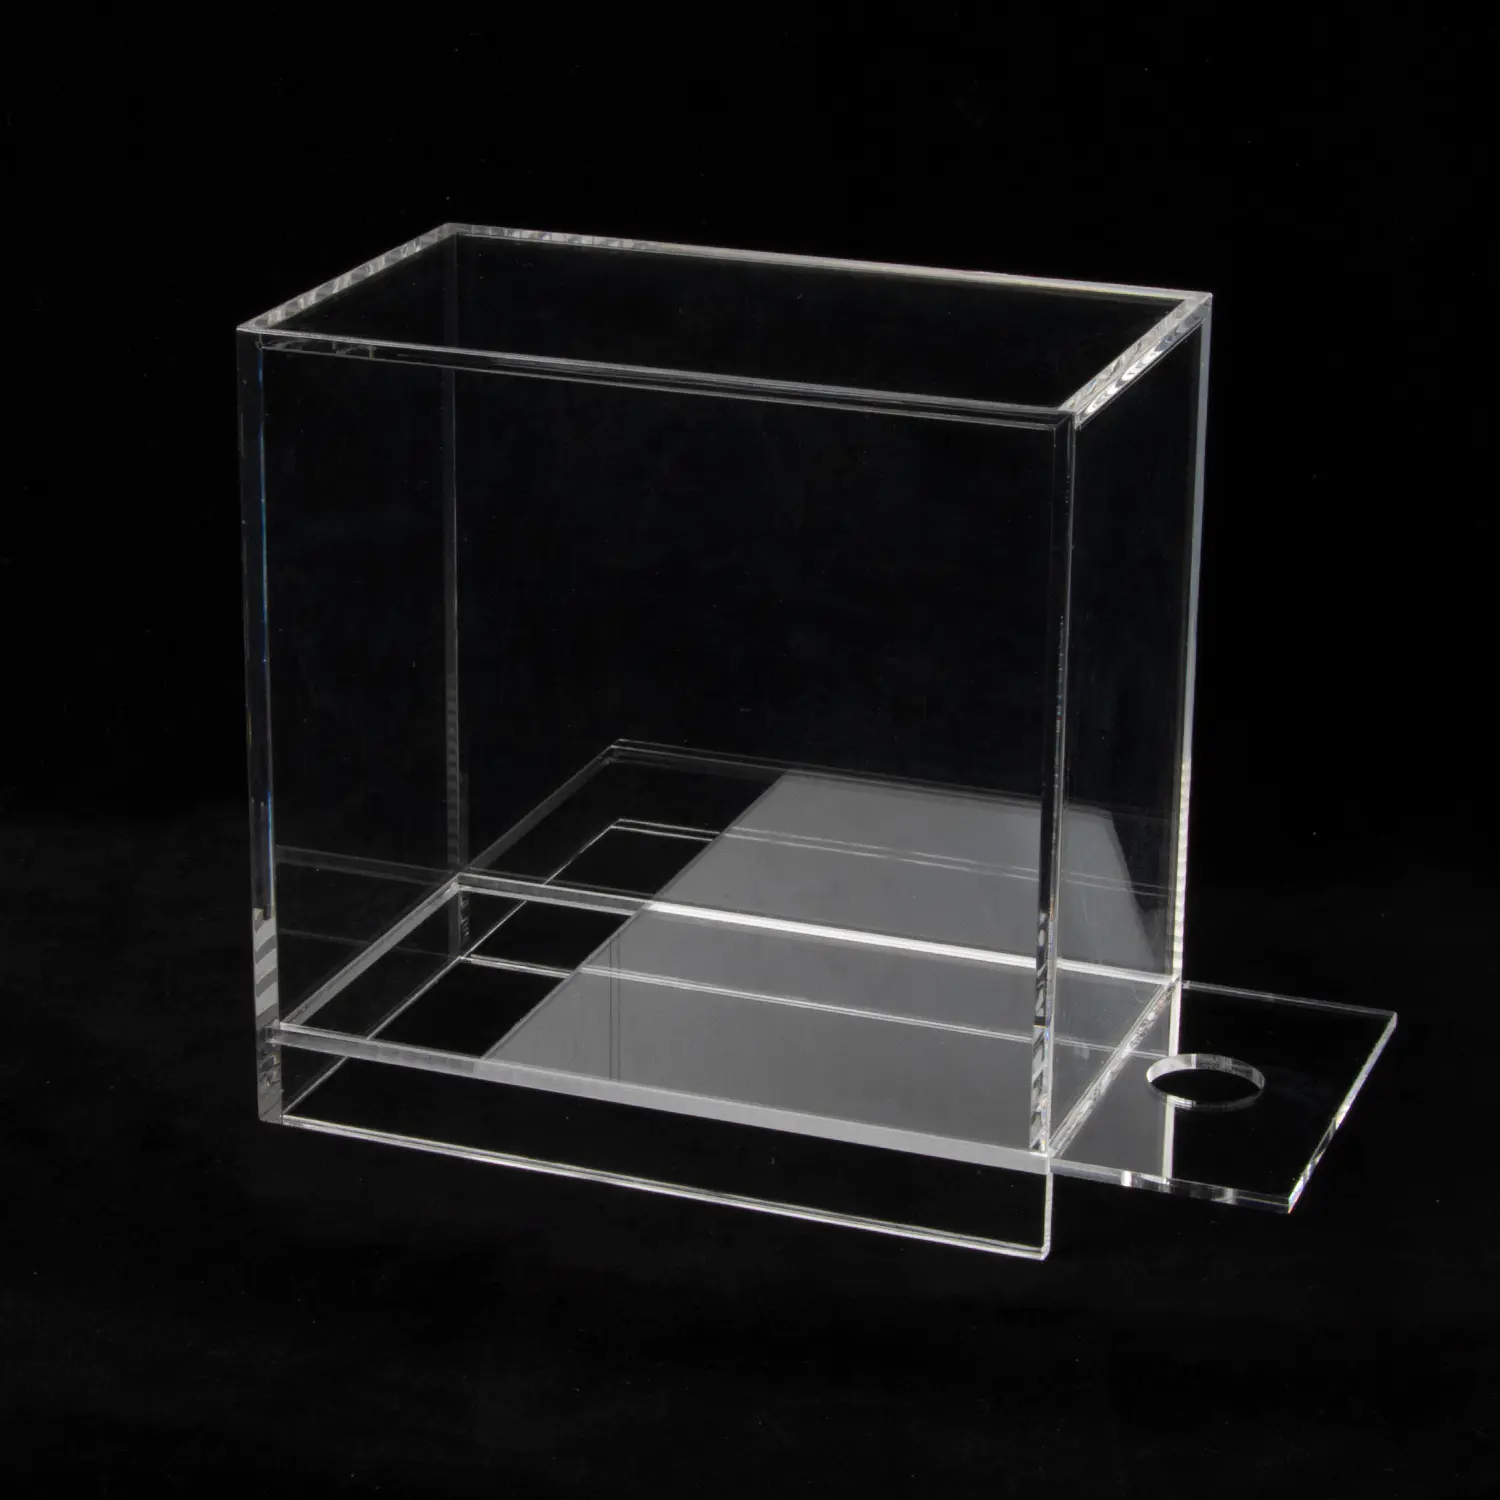 Acrylic Bottom Opening Magnetic Booster Box Display Case